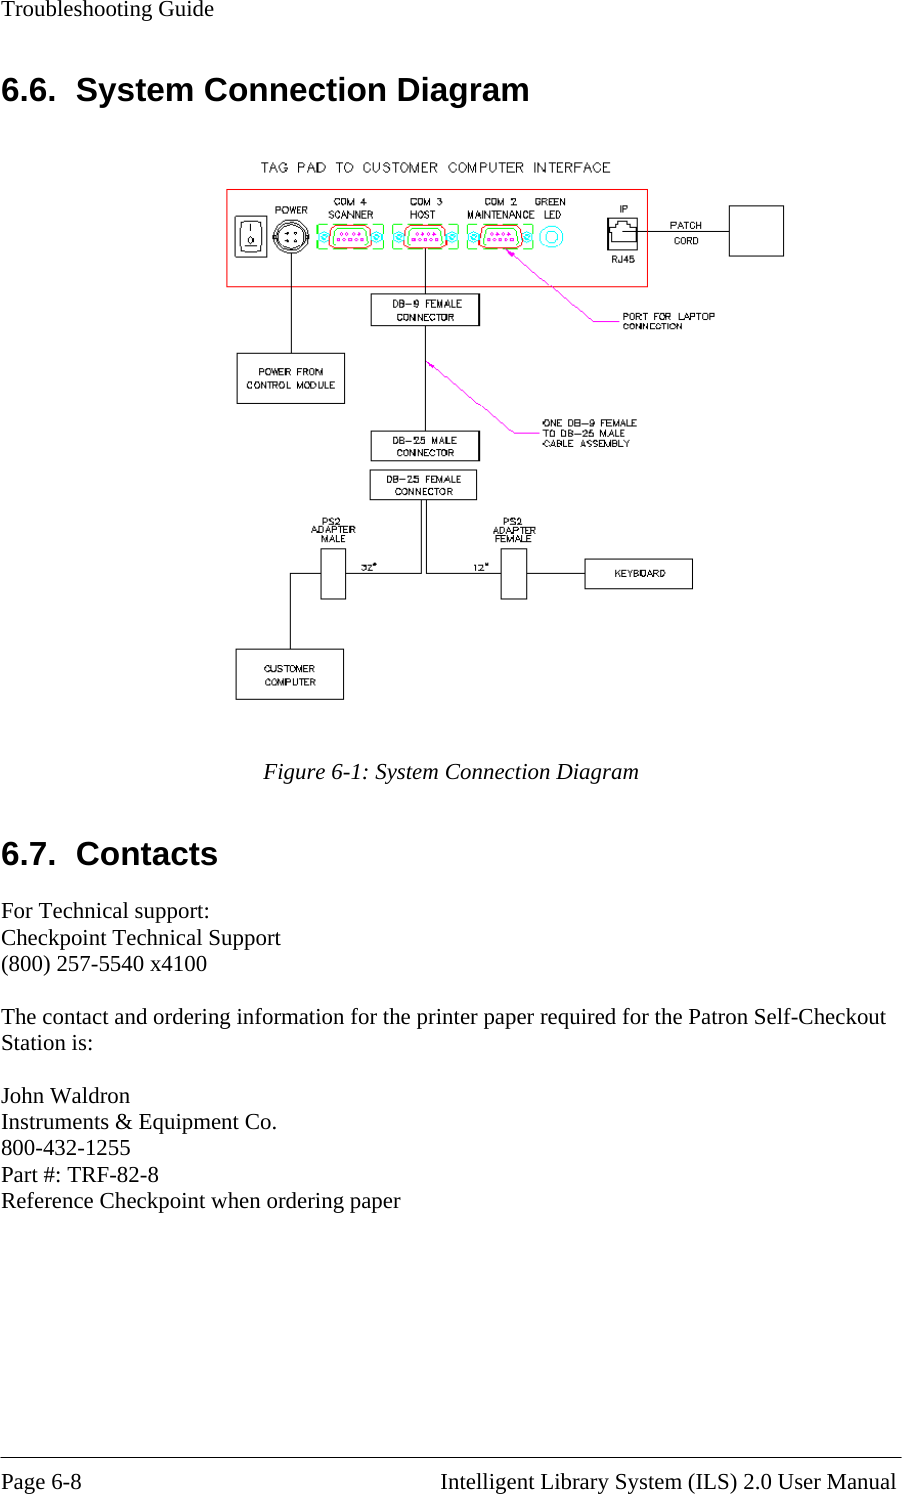 Troubleshooting Guide 6.6. System Connection Diagram   Figure 6-1: System Connection Diagram 6.7. Contacts For Technical support: Checkpoint Technical Support (800) 257-5540 x4100  The contact and ordering information for the printer paper required for the Patron Self-Checkout Station is:  John Waldron Instruments &amp; Equipment Co. 800-432-1255 Part #: TRF-82-8 Reference Checkpoint when ordering paper  Page 6-8                                                       Intelligent Library System (ILS) 2.0 User Manual 